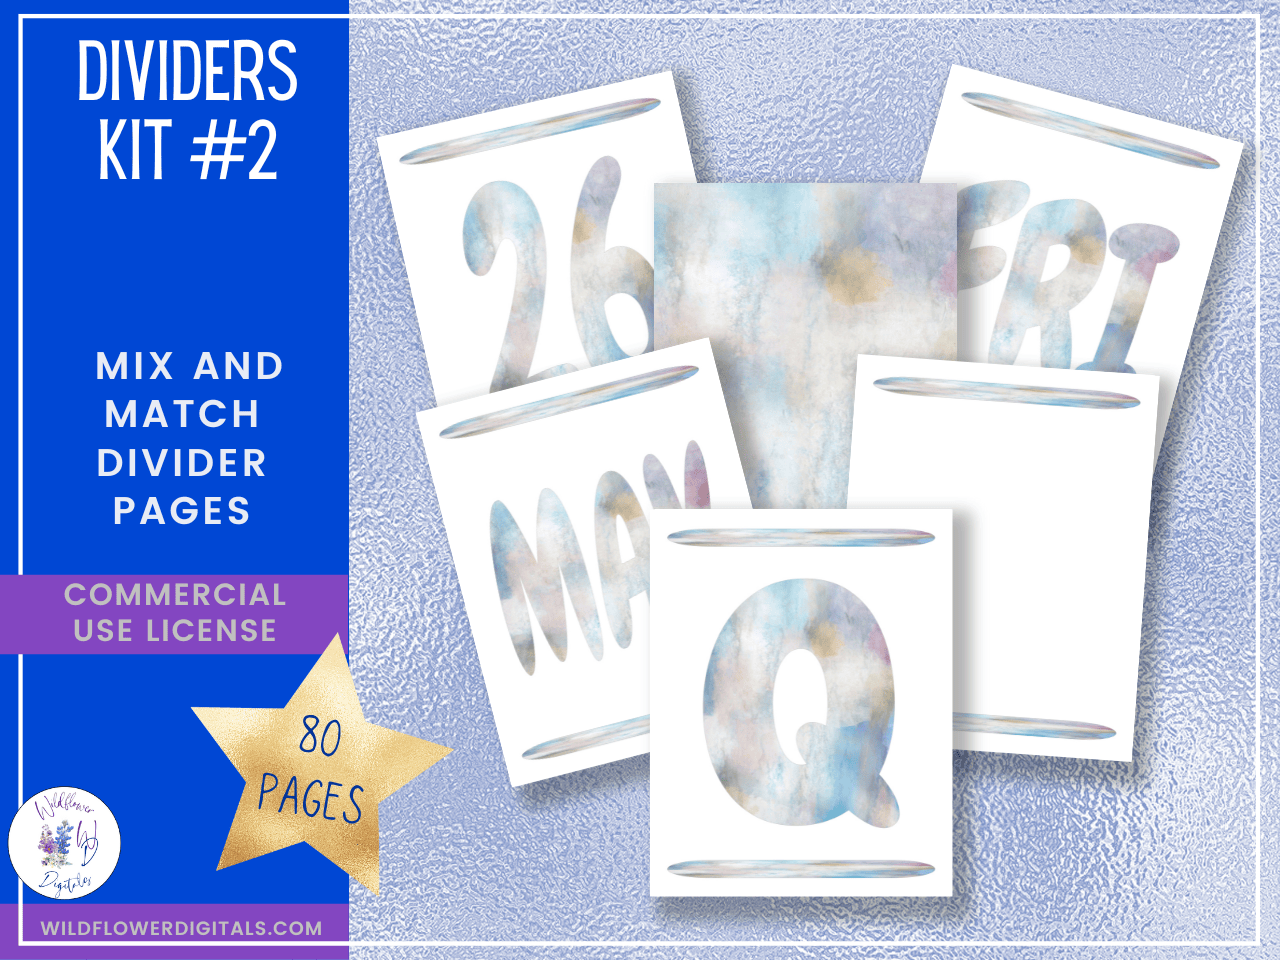 mockup of bundle for divider kits 1-5 mix and match stationery designs